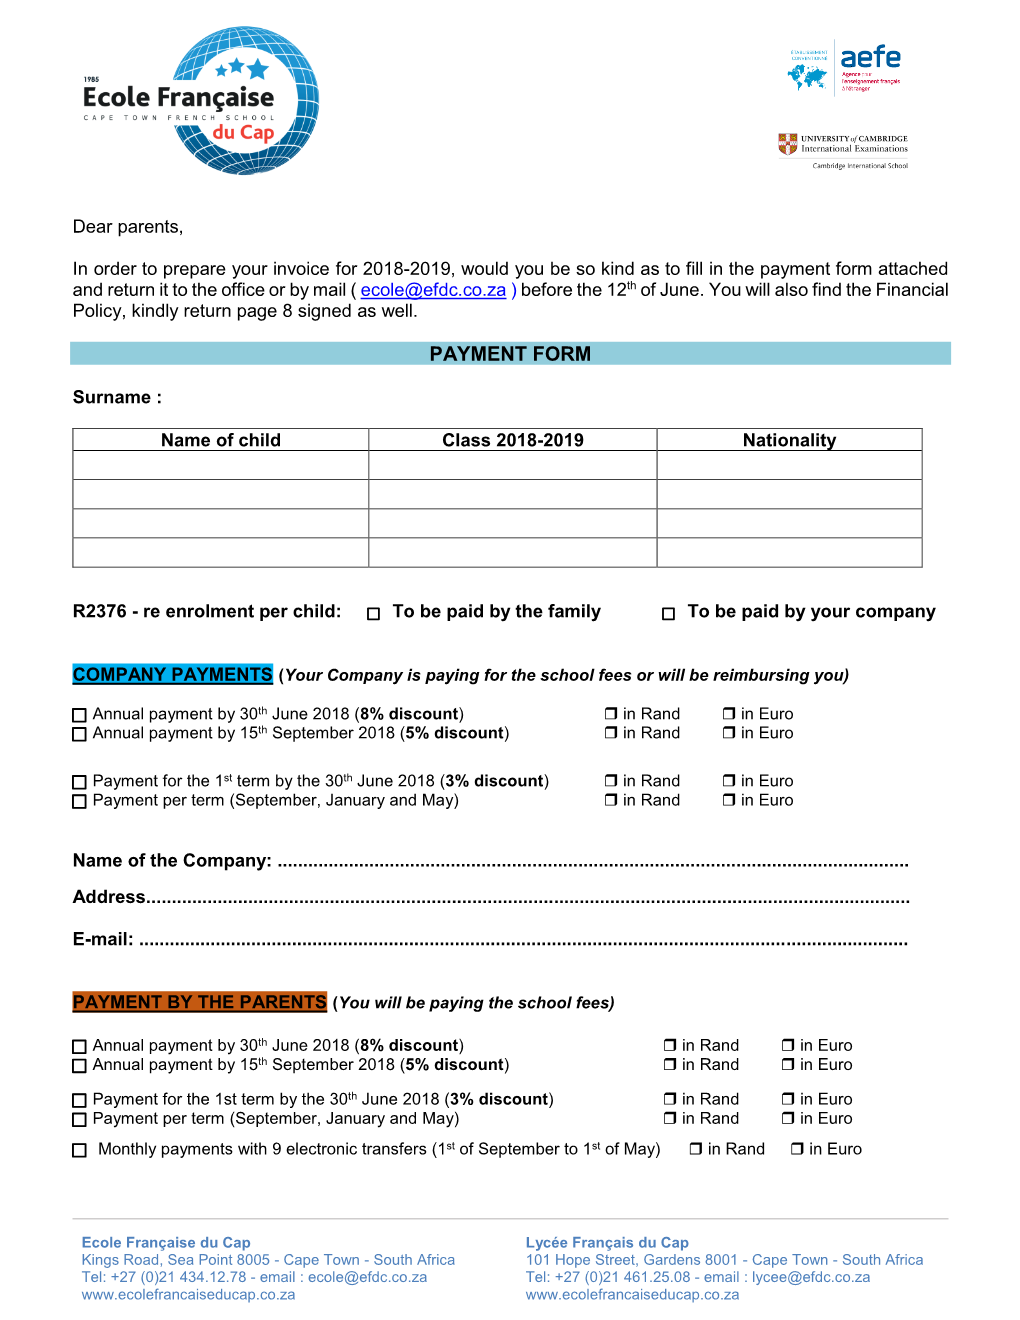 Payment Form Attached and Return It to the Office Or by Mail ( Ecole@Efdc.Co.Za ) Before the 12Th of June